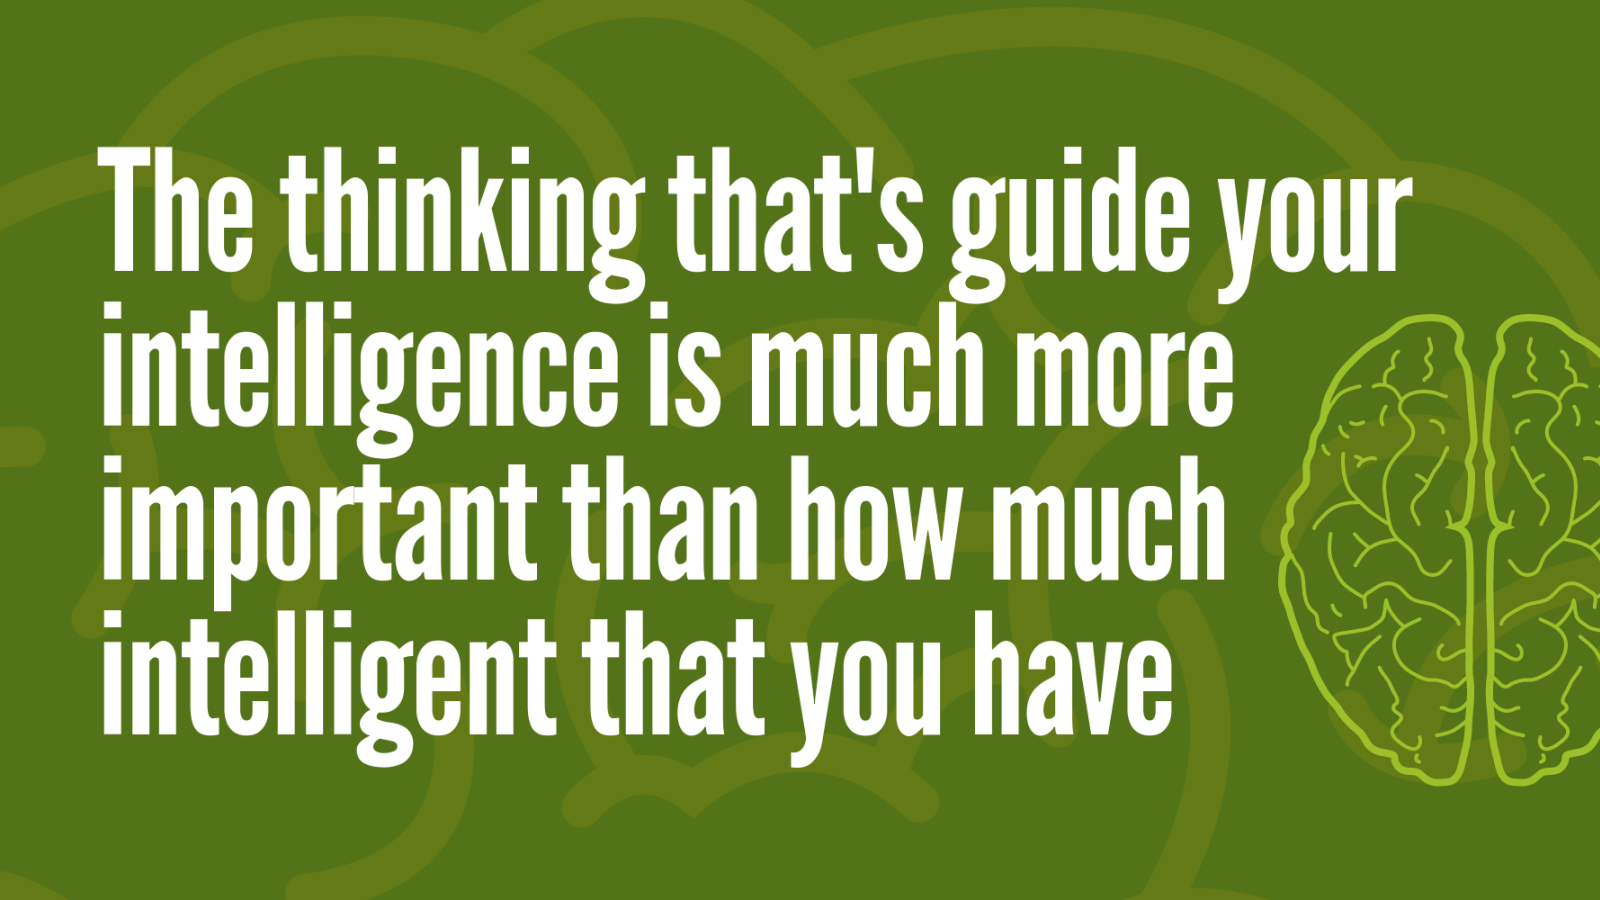 The thinking that's guide your intelligence is much more important than how much intelligent that you have